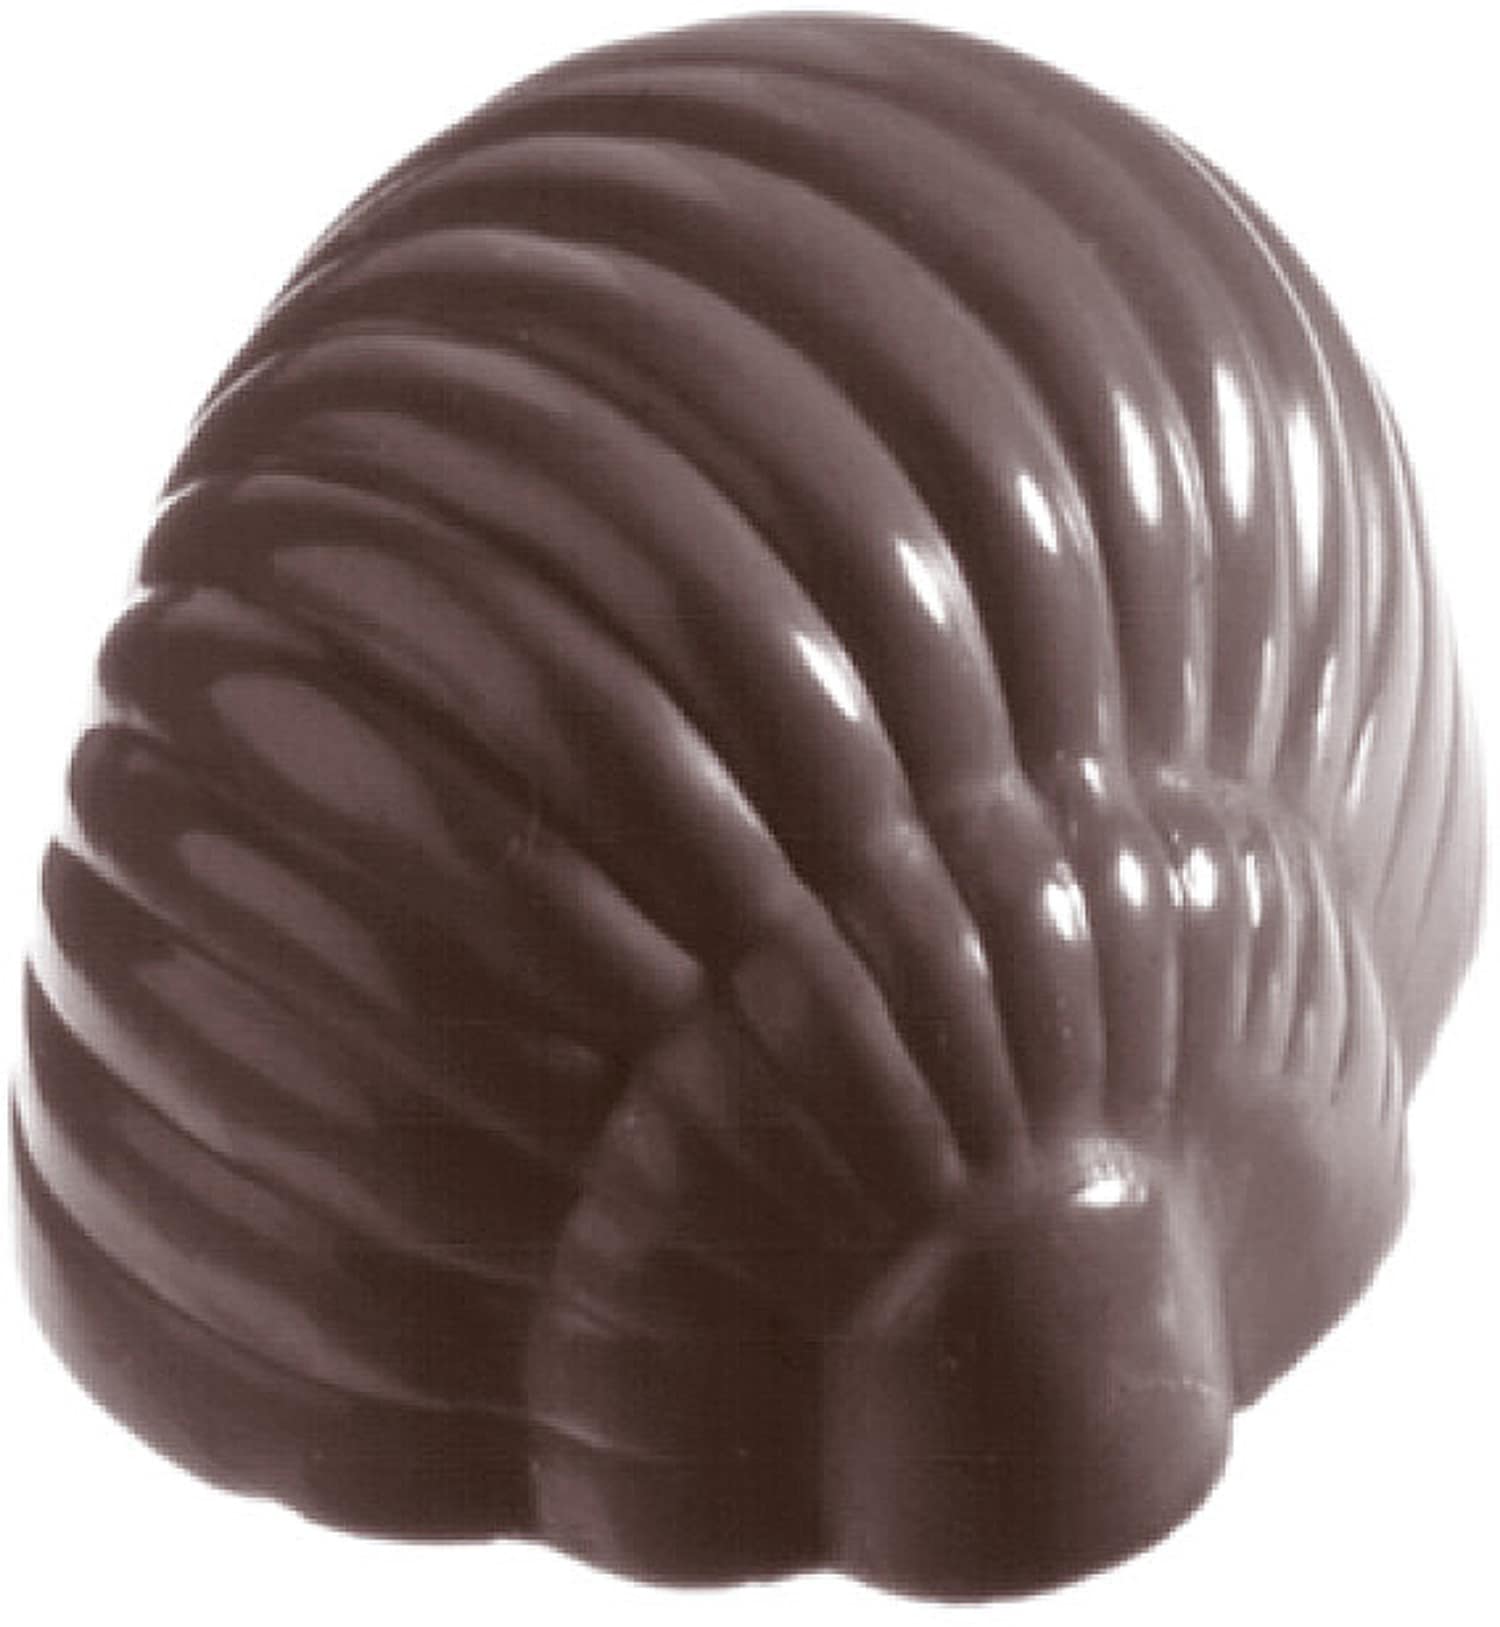 Chocolate mould "Seafood" 421084 421084